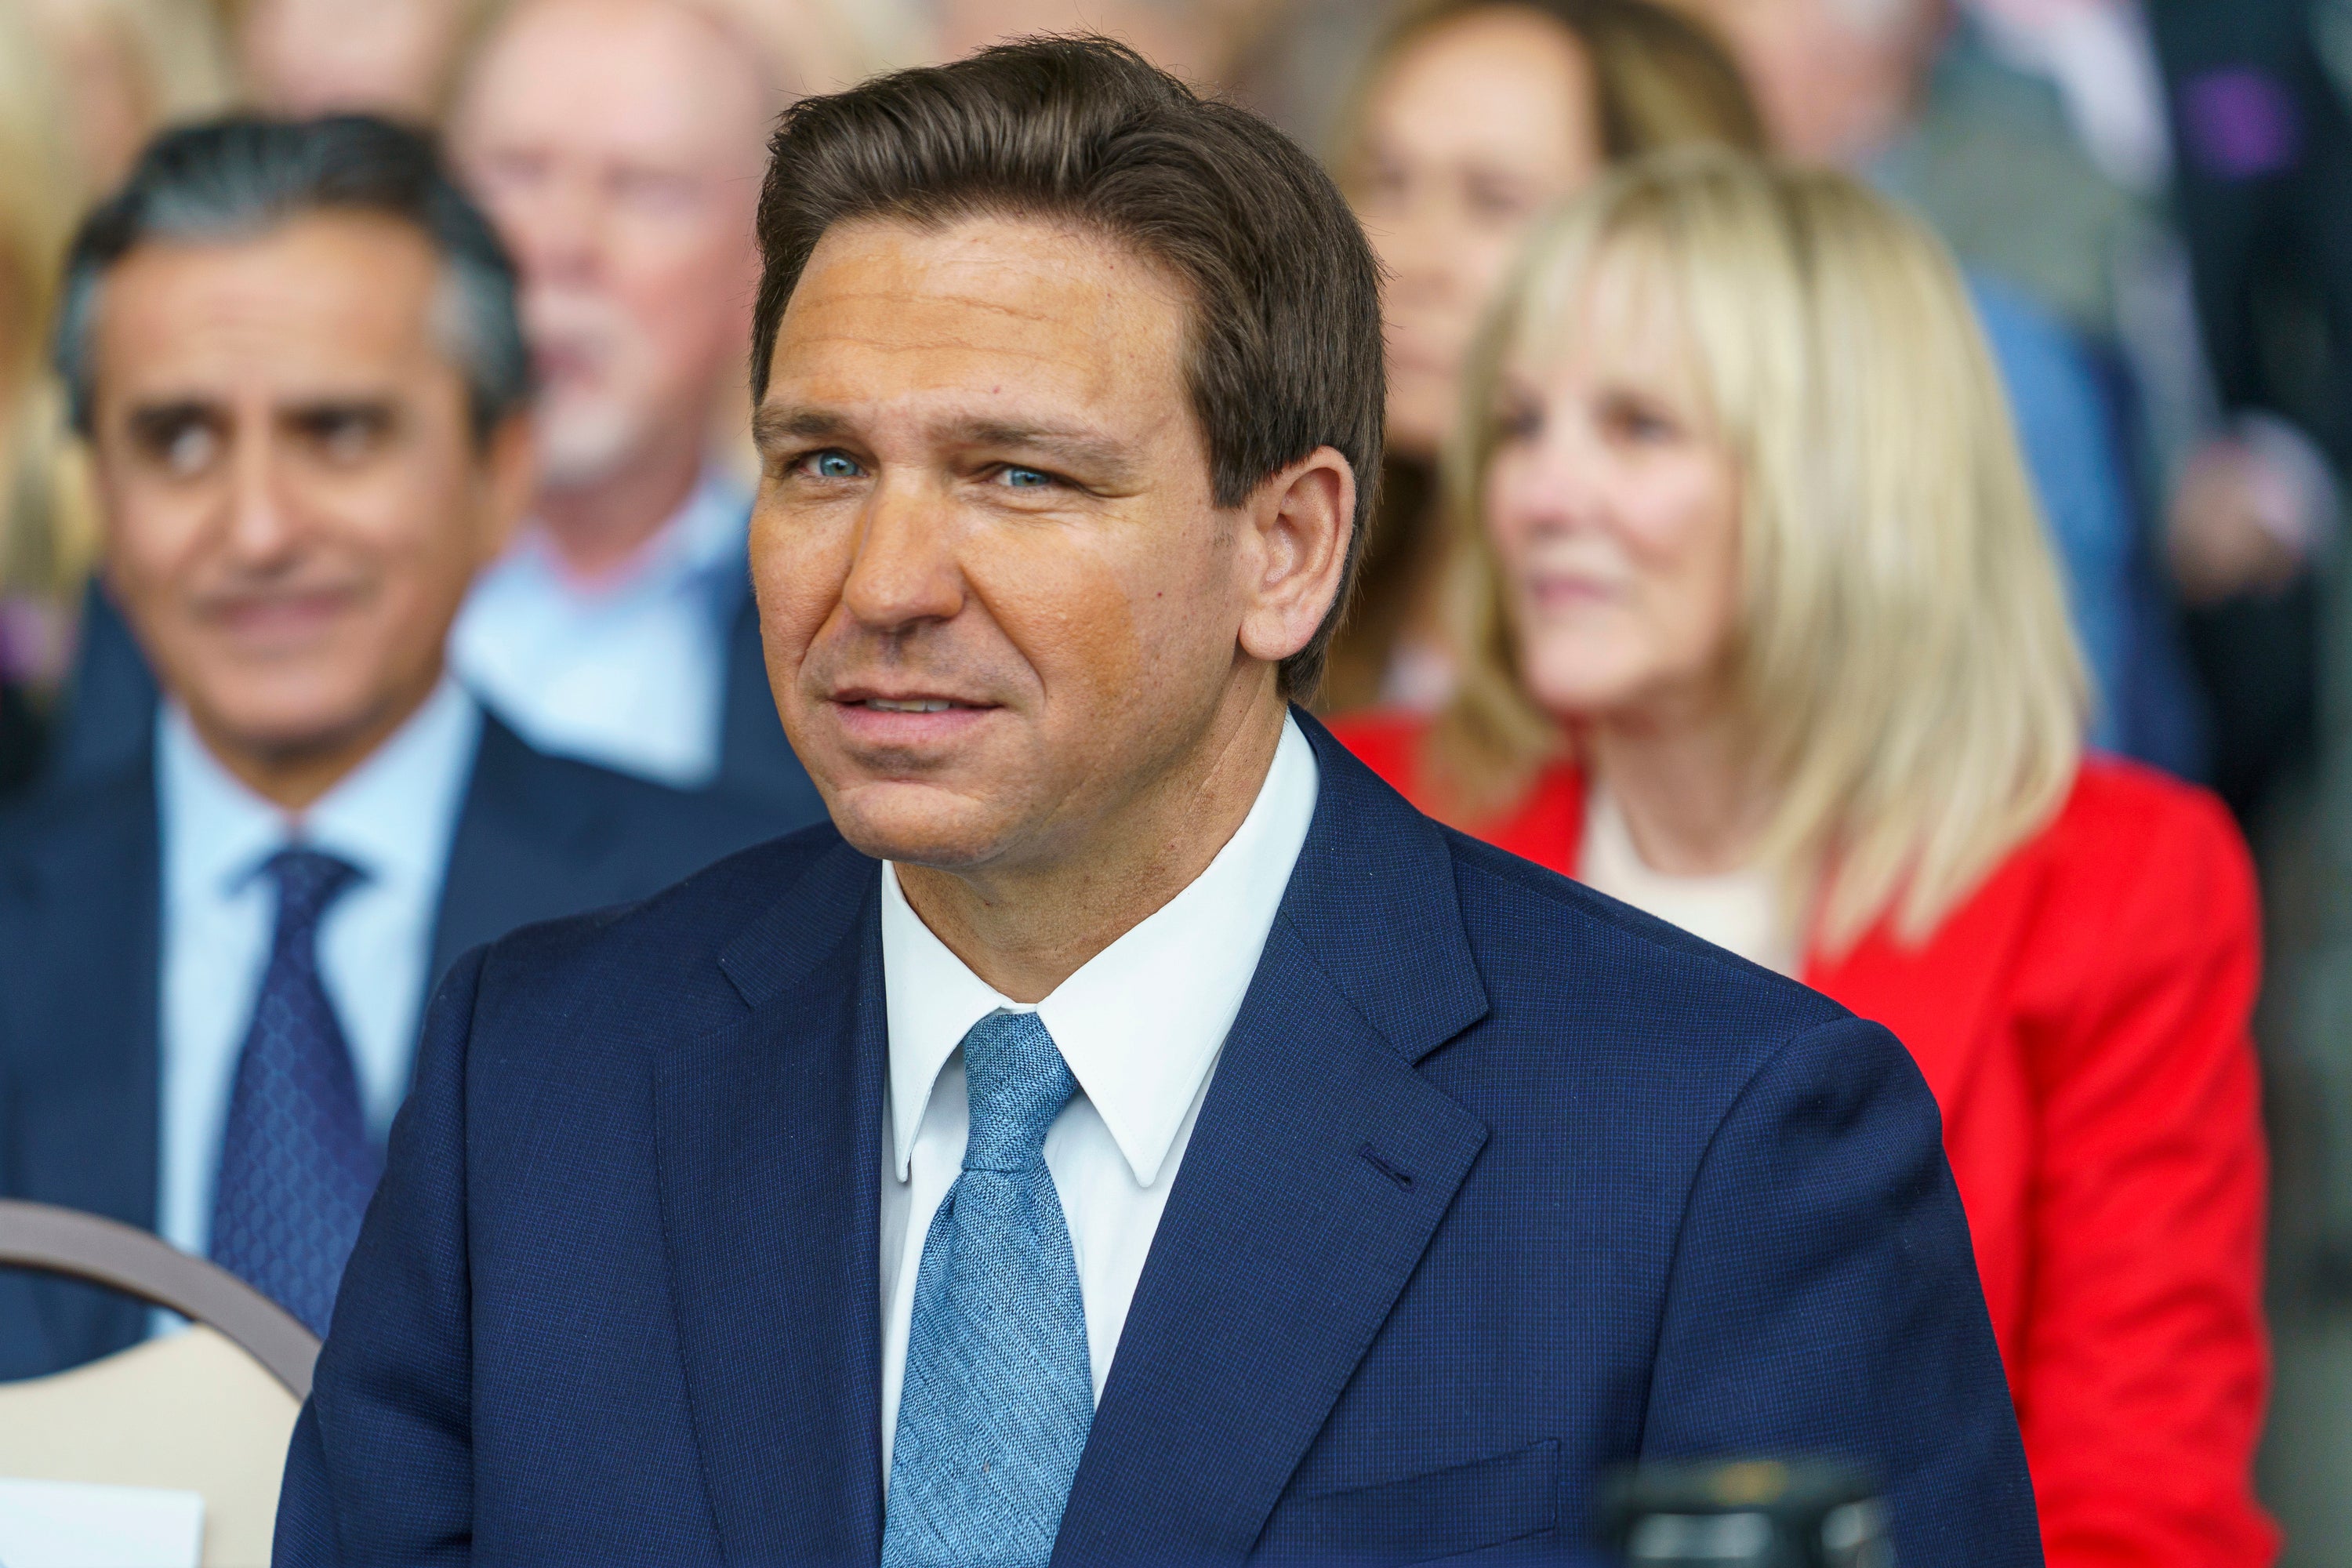 Florida Republican Gov. Ron DeSantis sits with his family before addressing supporters at The Ronald Reagan Presidential Library in Simi Valley, Calif., Sunday, March 5, 2023. DeSantis has quietly begun to expand his political coalition on his terms just as he releases a book, "The Courage to be Free," which comes out Tuesday. (AP Photo/Damian Dovarganes)